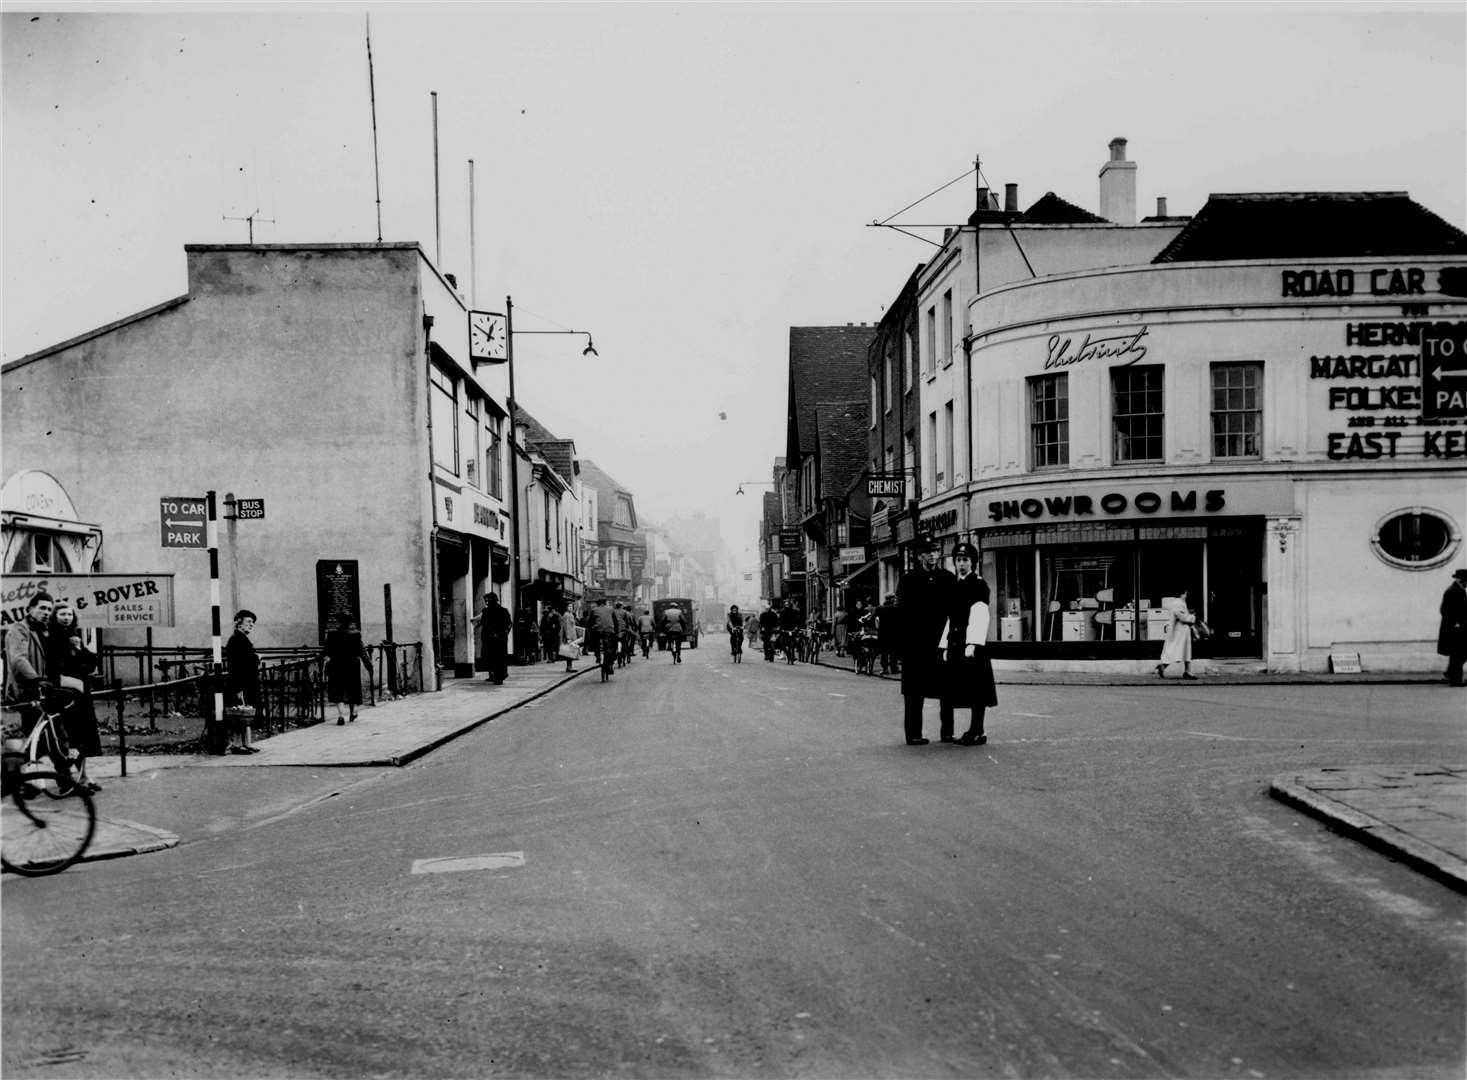 Looking up St Peter's Street from the Westgate, Canterbury, in November 1953. The Electricity showrooms on the corner - demolished in 1961 for road widening that never came - used to be the Corner House Cafe. Just visible (right) are the destinations of the East Kent Road Car Company, whose bus station was in St Peter's Place until the mid-1950s